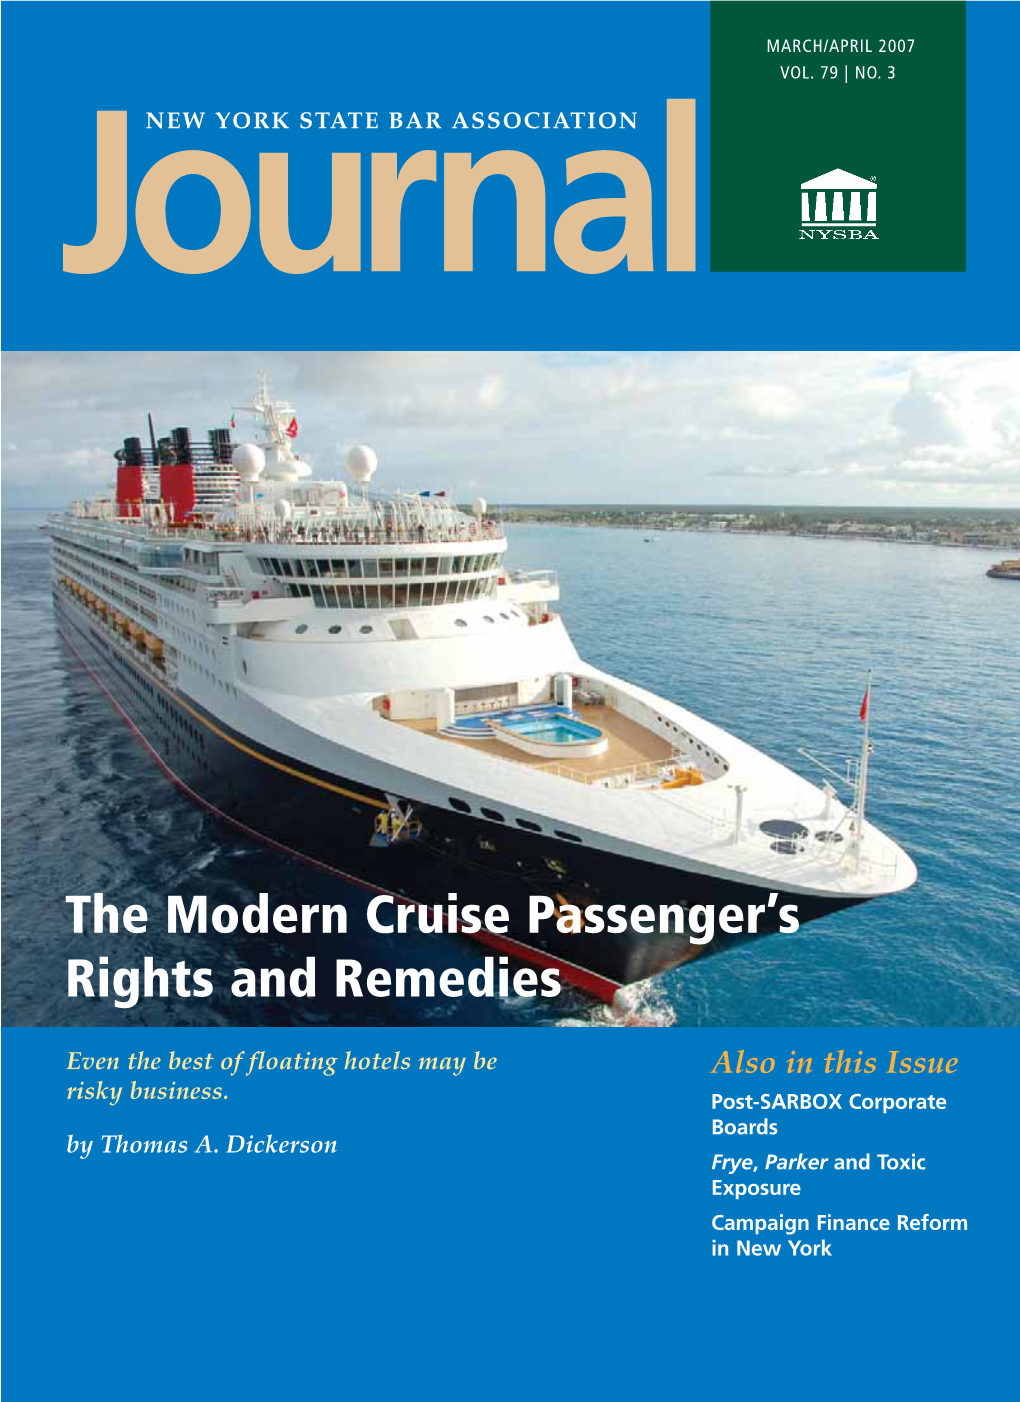 The Modern Cruise Passenger's Rights and Remedies